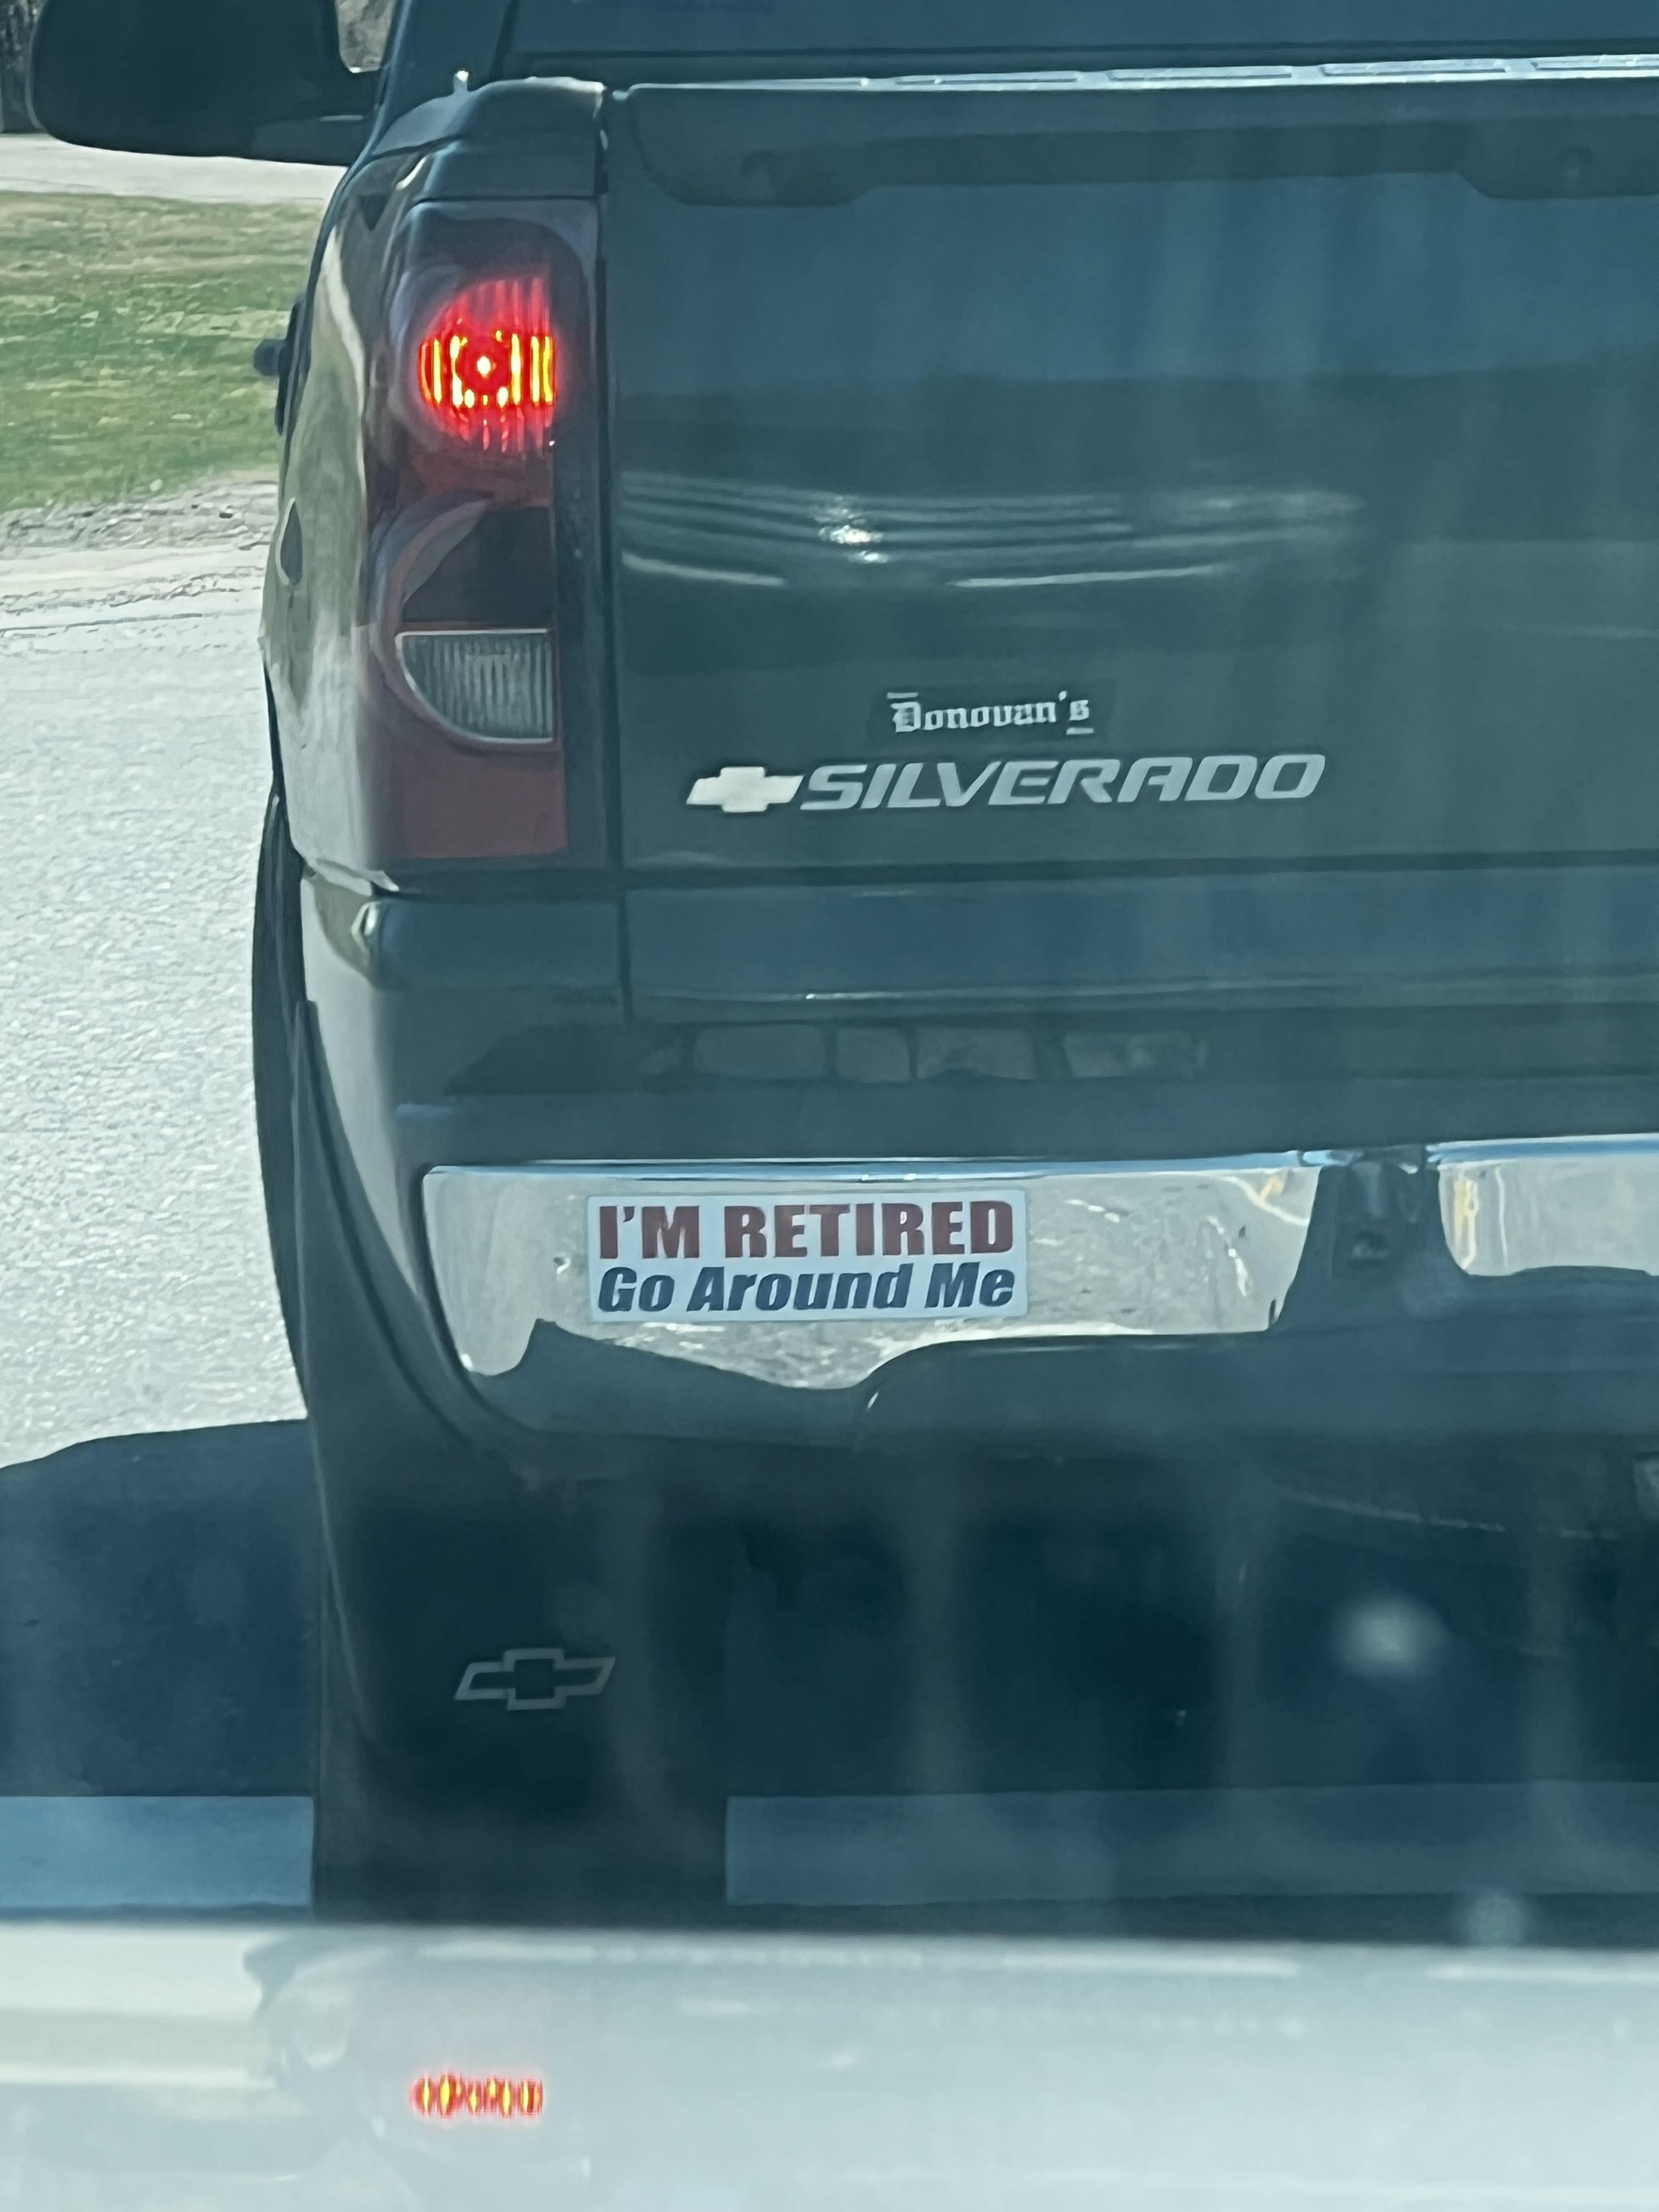 Saw this bumper sticker on a car that was driving slow.